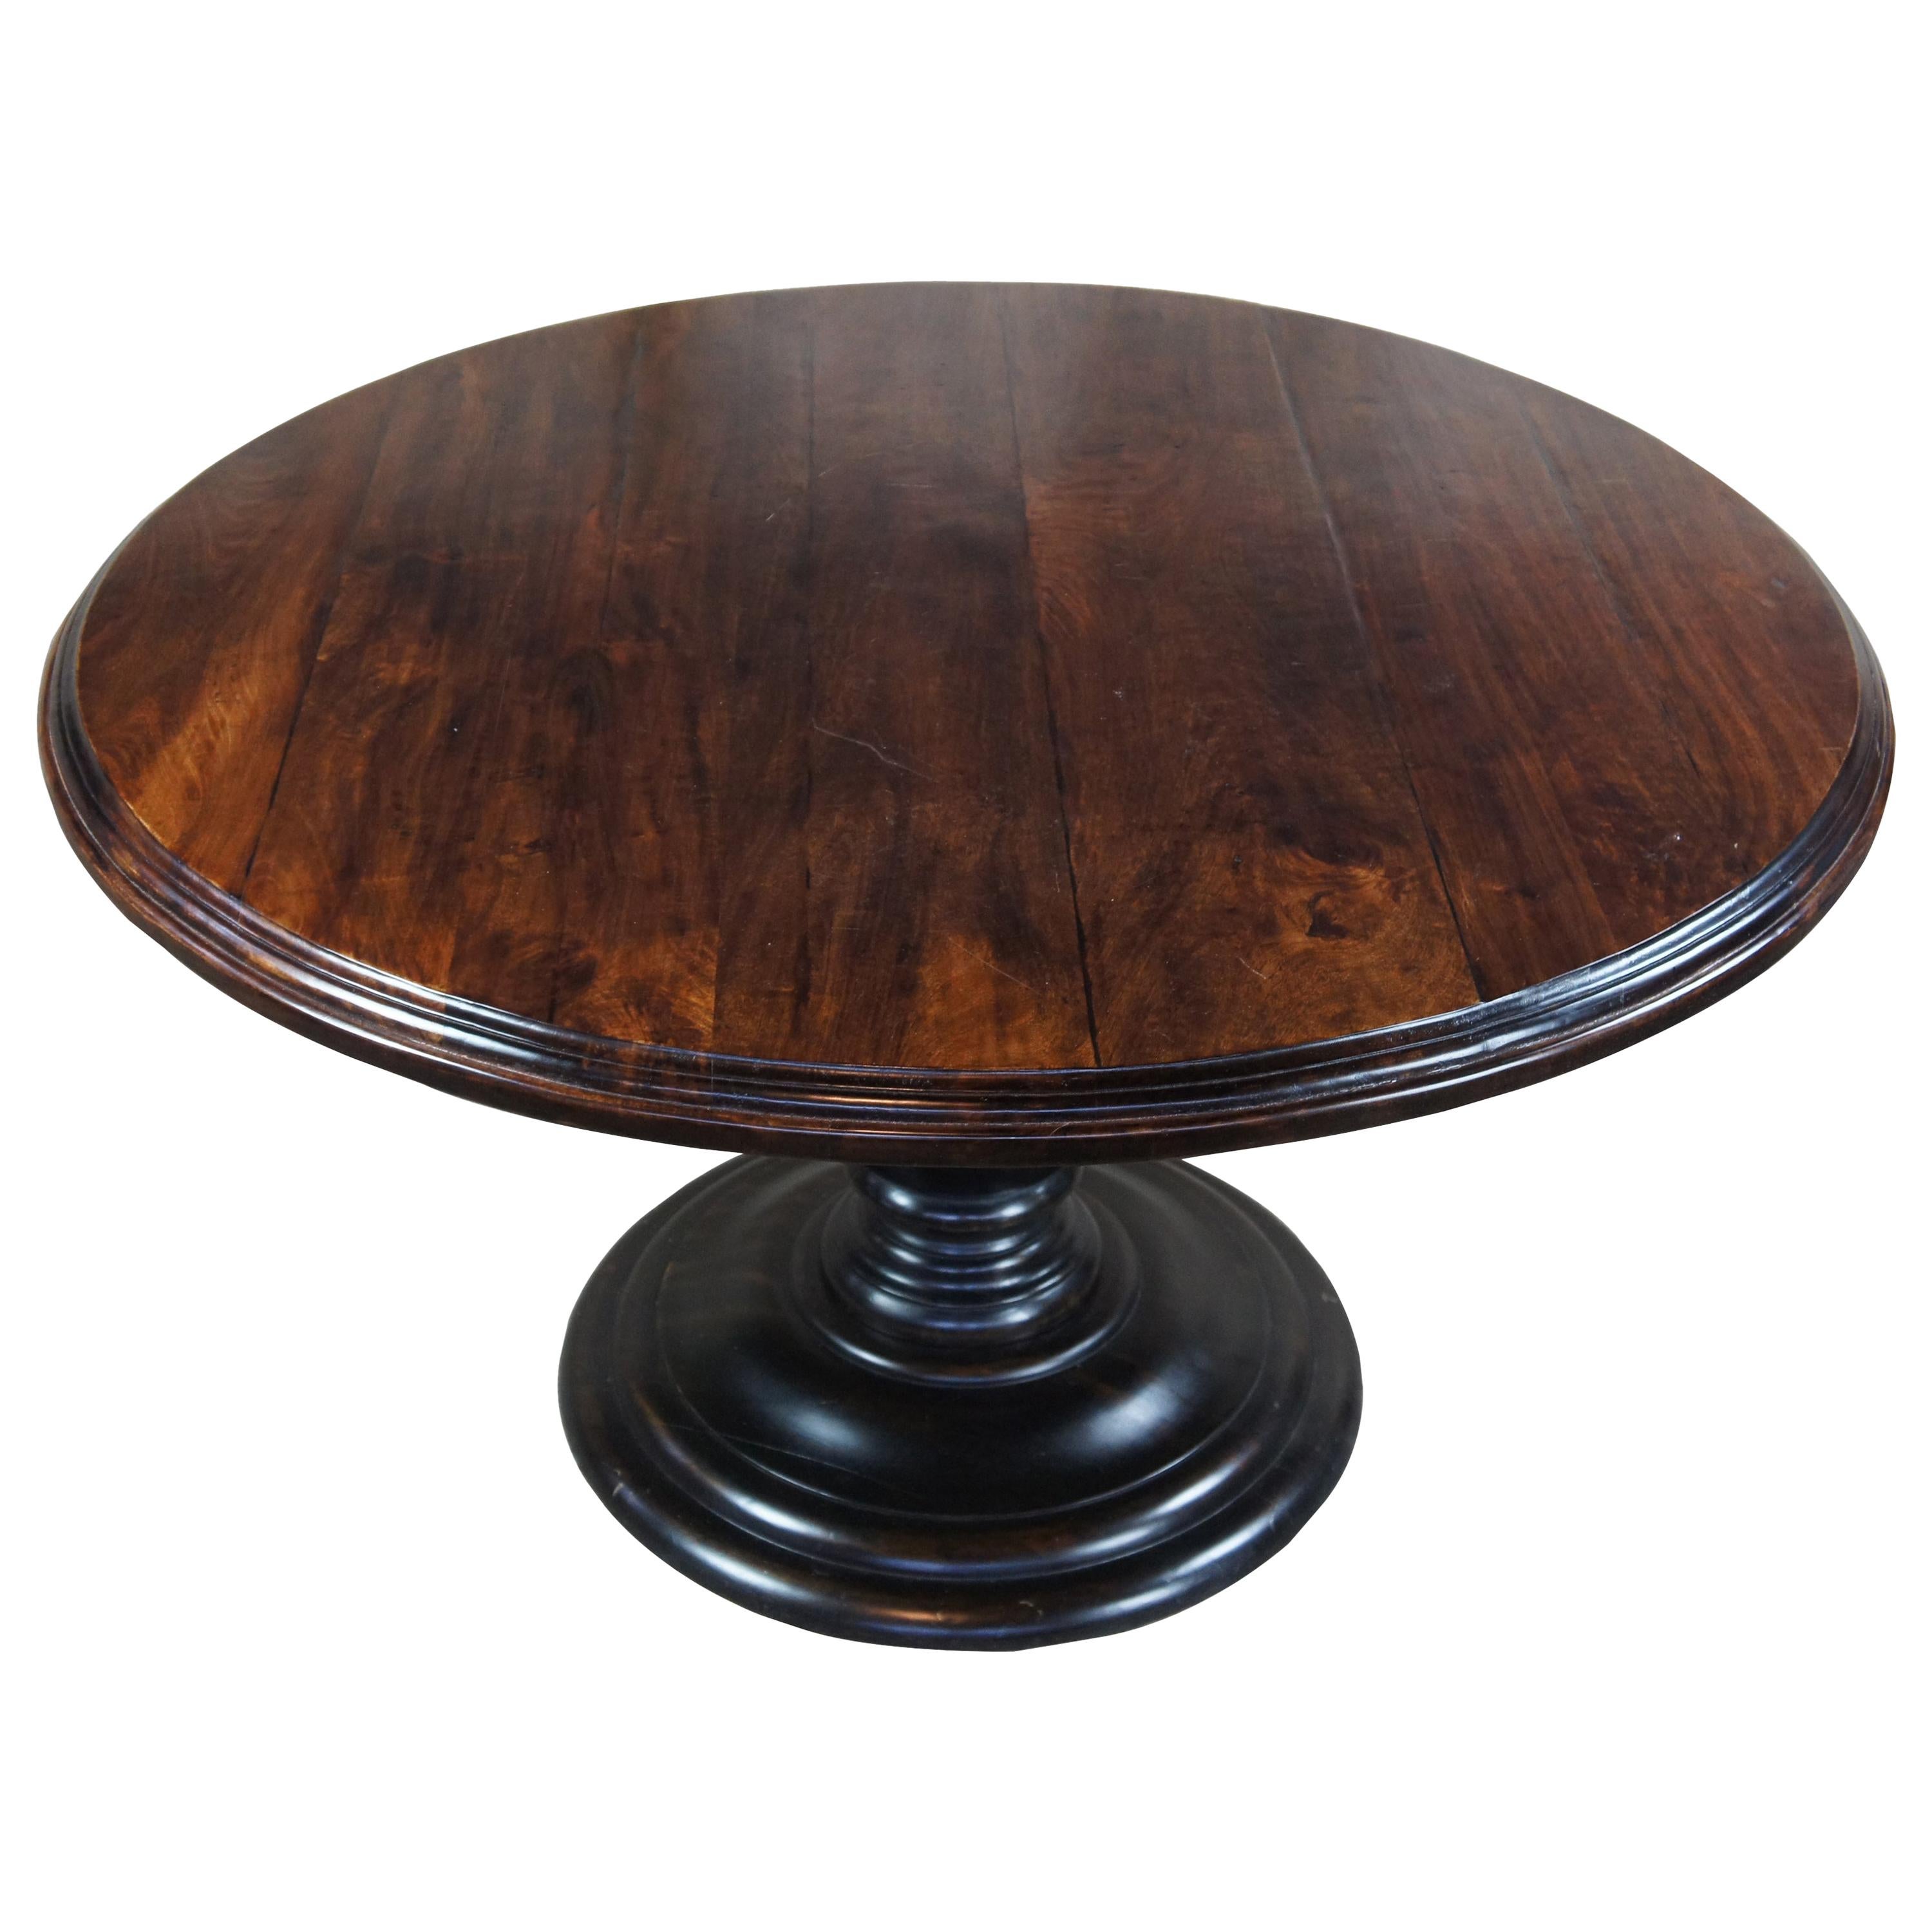 Arhaus French Country Round Farmhouse Pedestal Dining Table